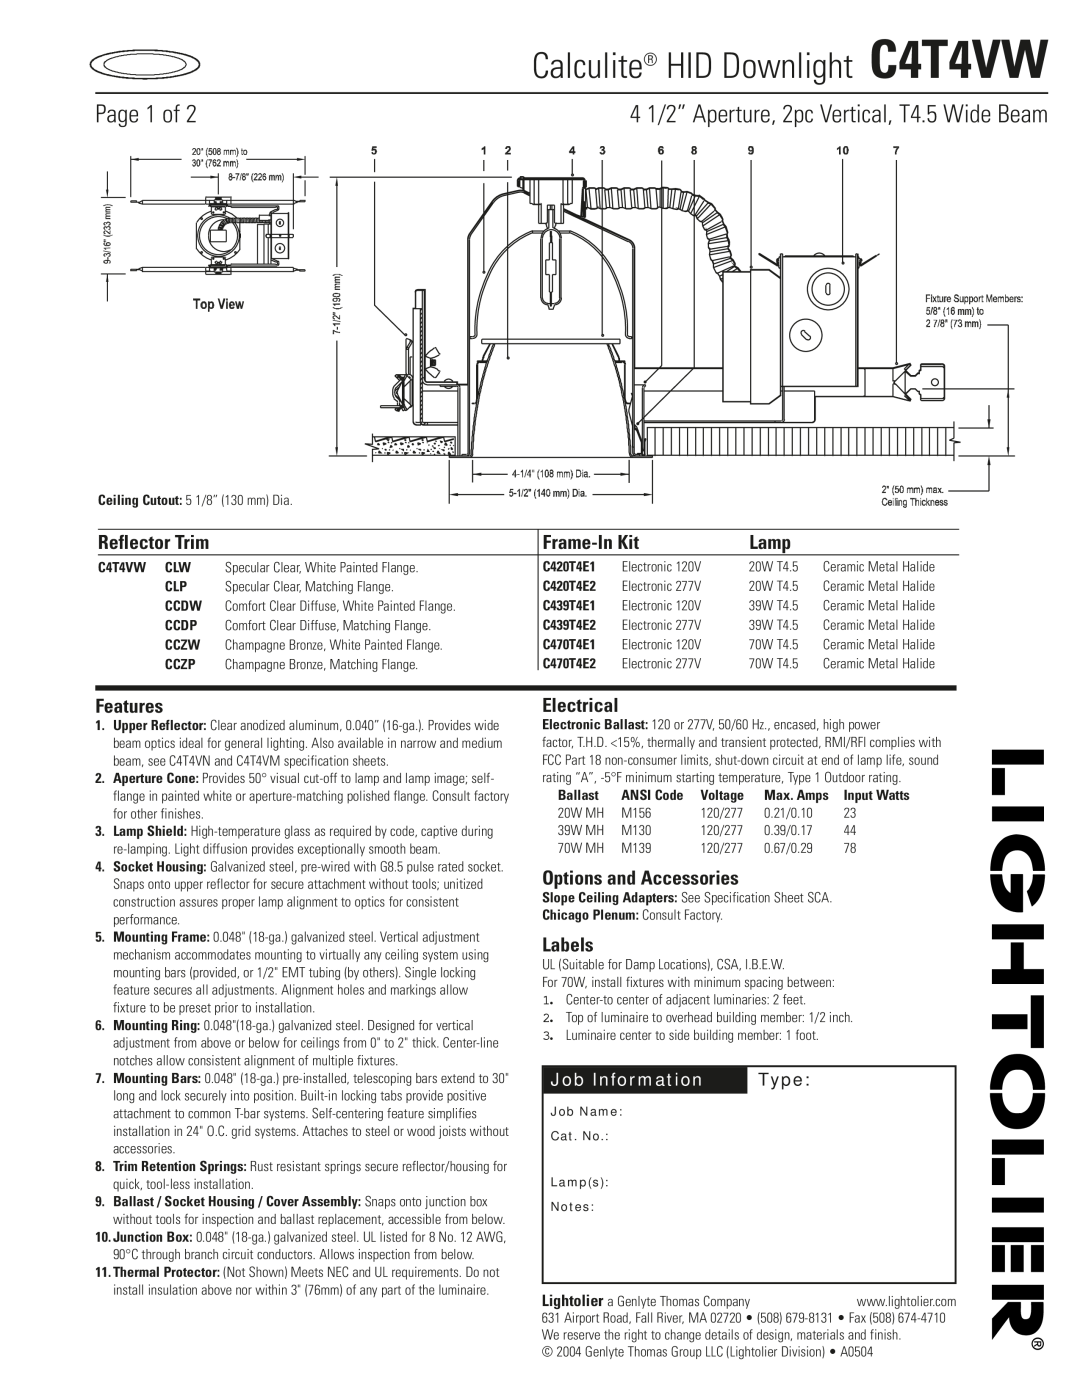 Lightolier specifications Calculite HID Downlight C4T4VW, Page 1 of, 4 1/2” Aperture, 2pc Vertical, T4.5 Wide Beam 